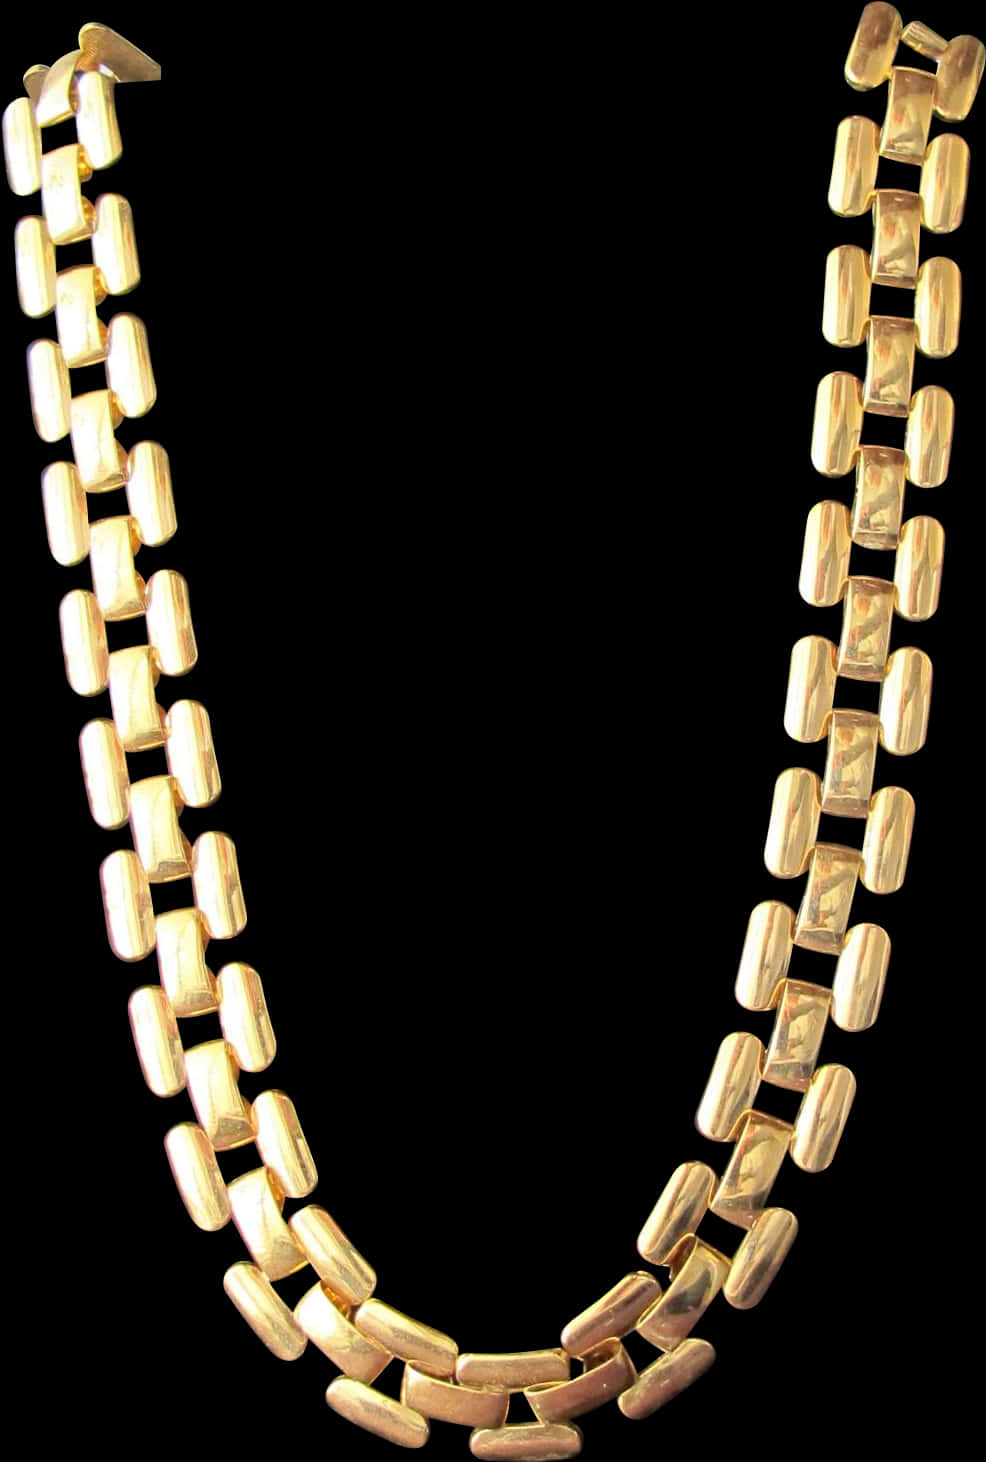 A Gold Necklace On A Black Background